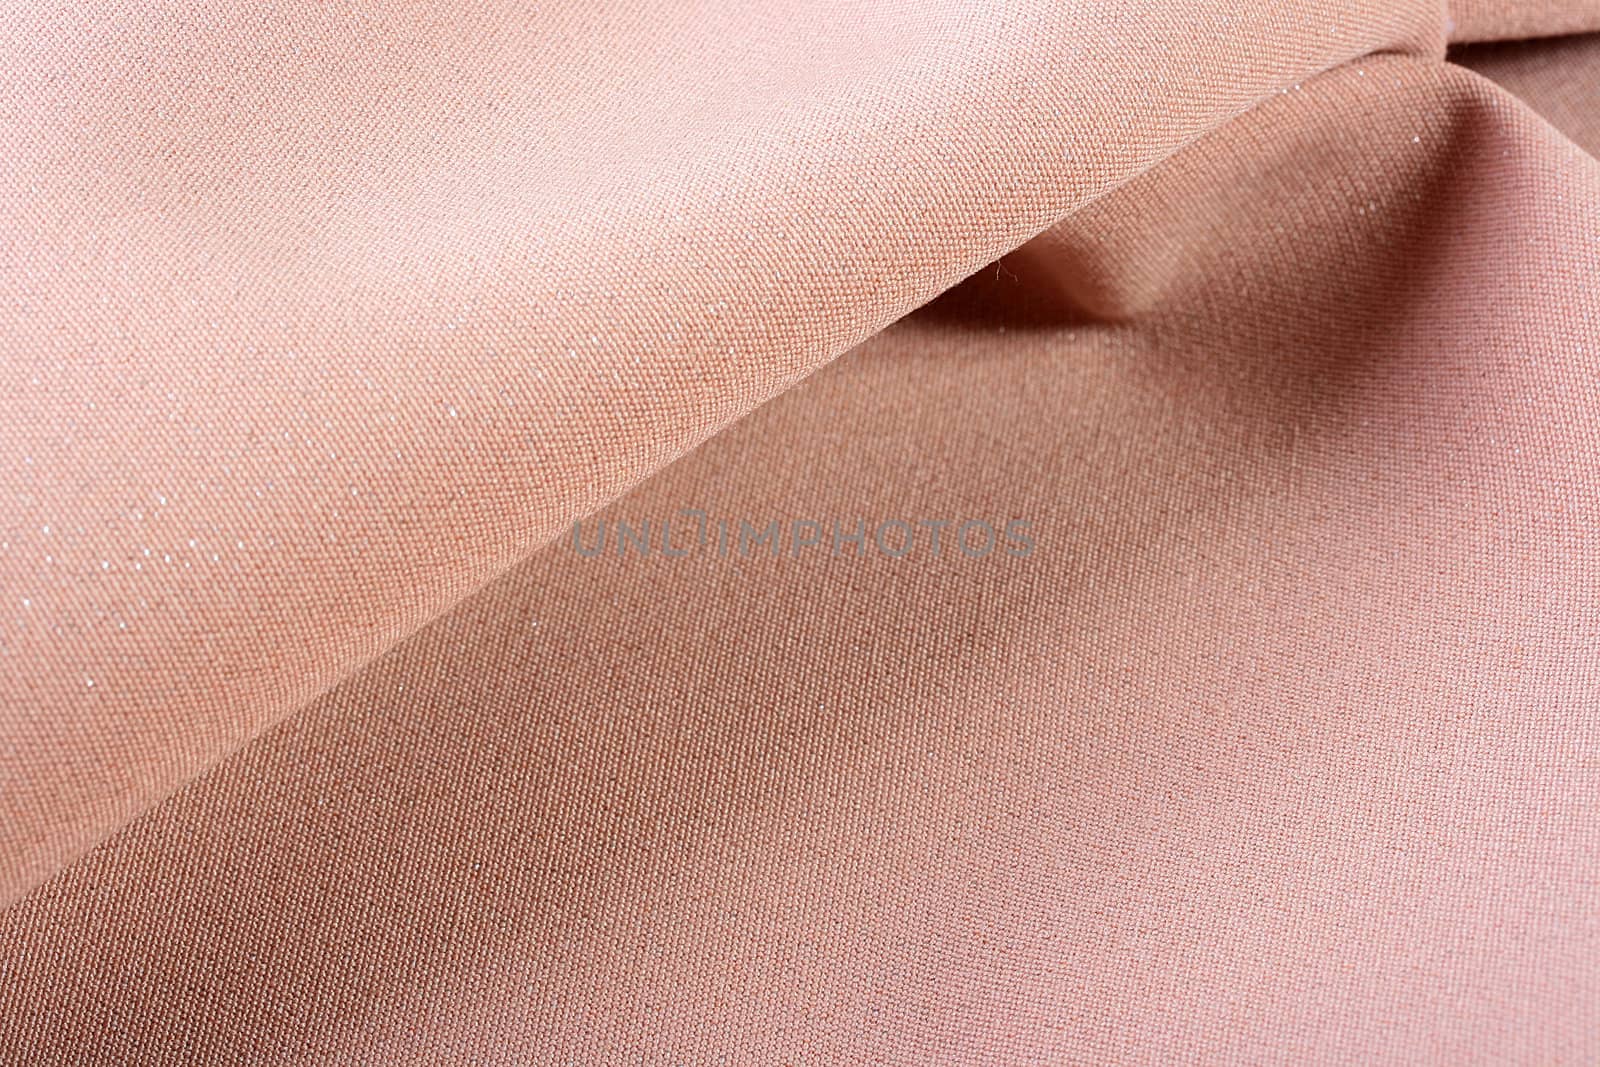 Background from a beige fabric which is used in a clothing industry.